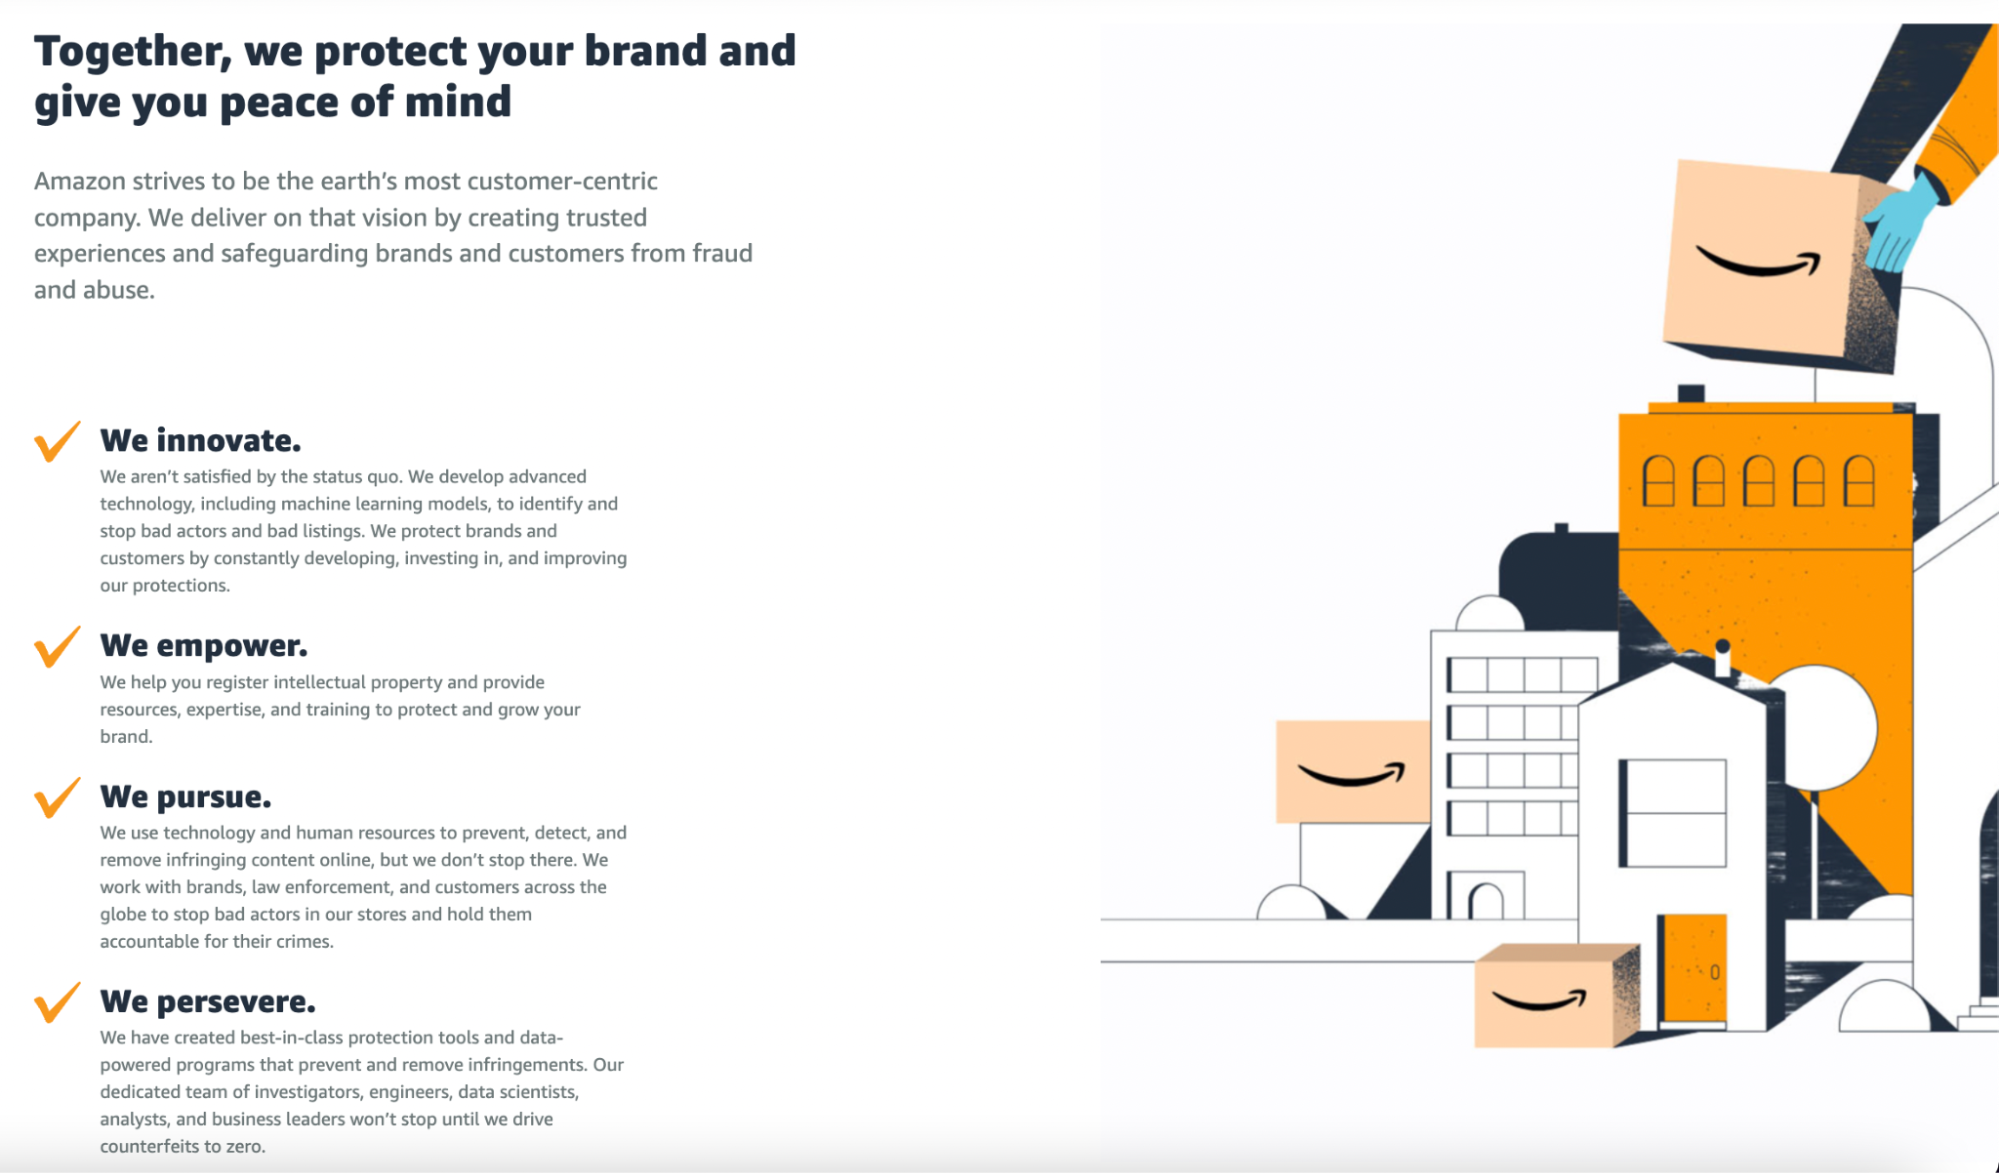 Brand Registry: Help Protect Your Brand on